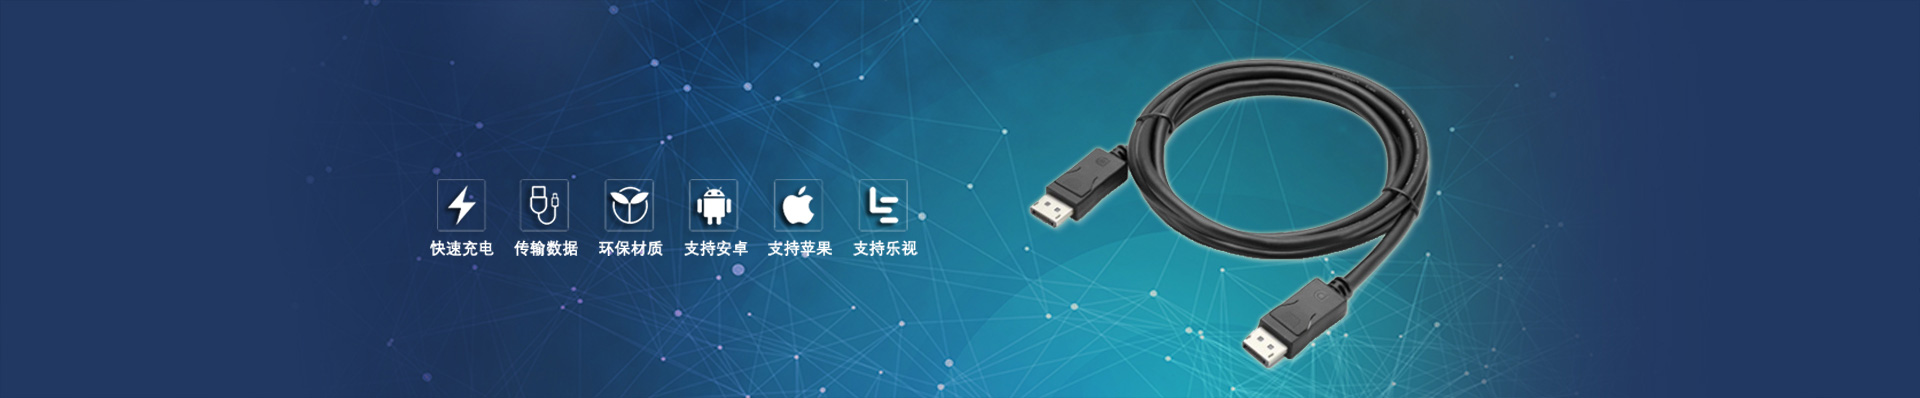 USB Type-c Cable